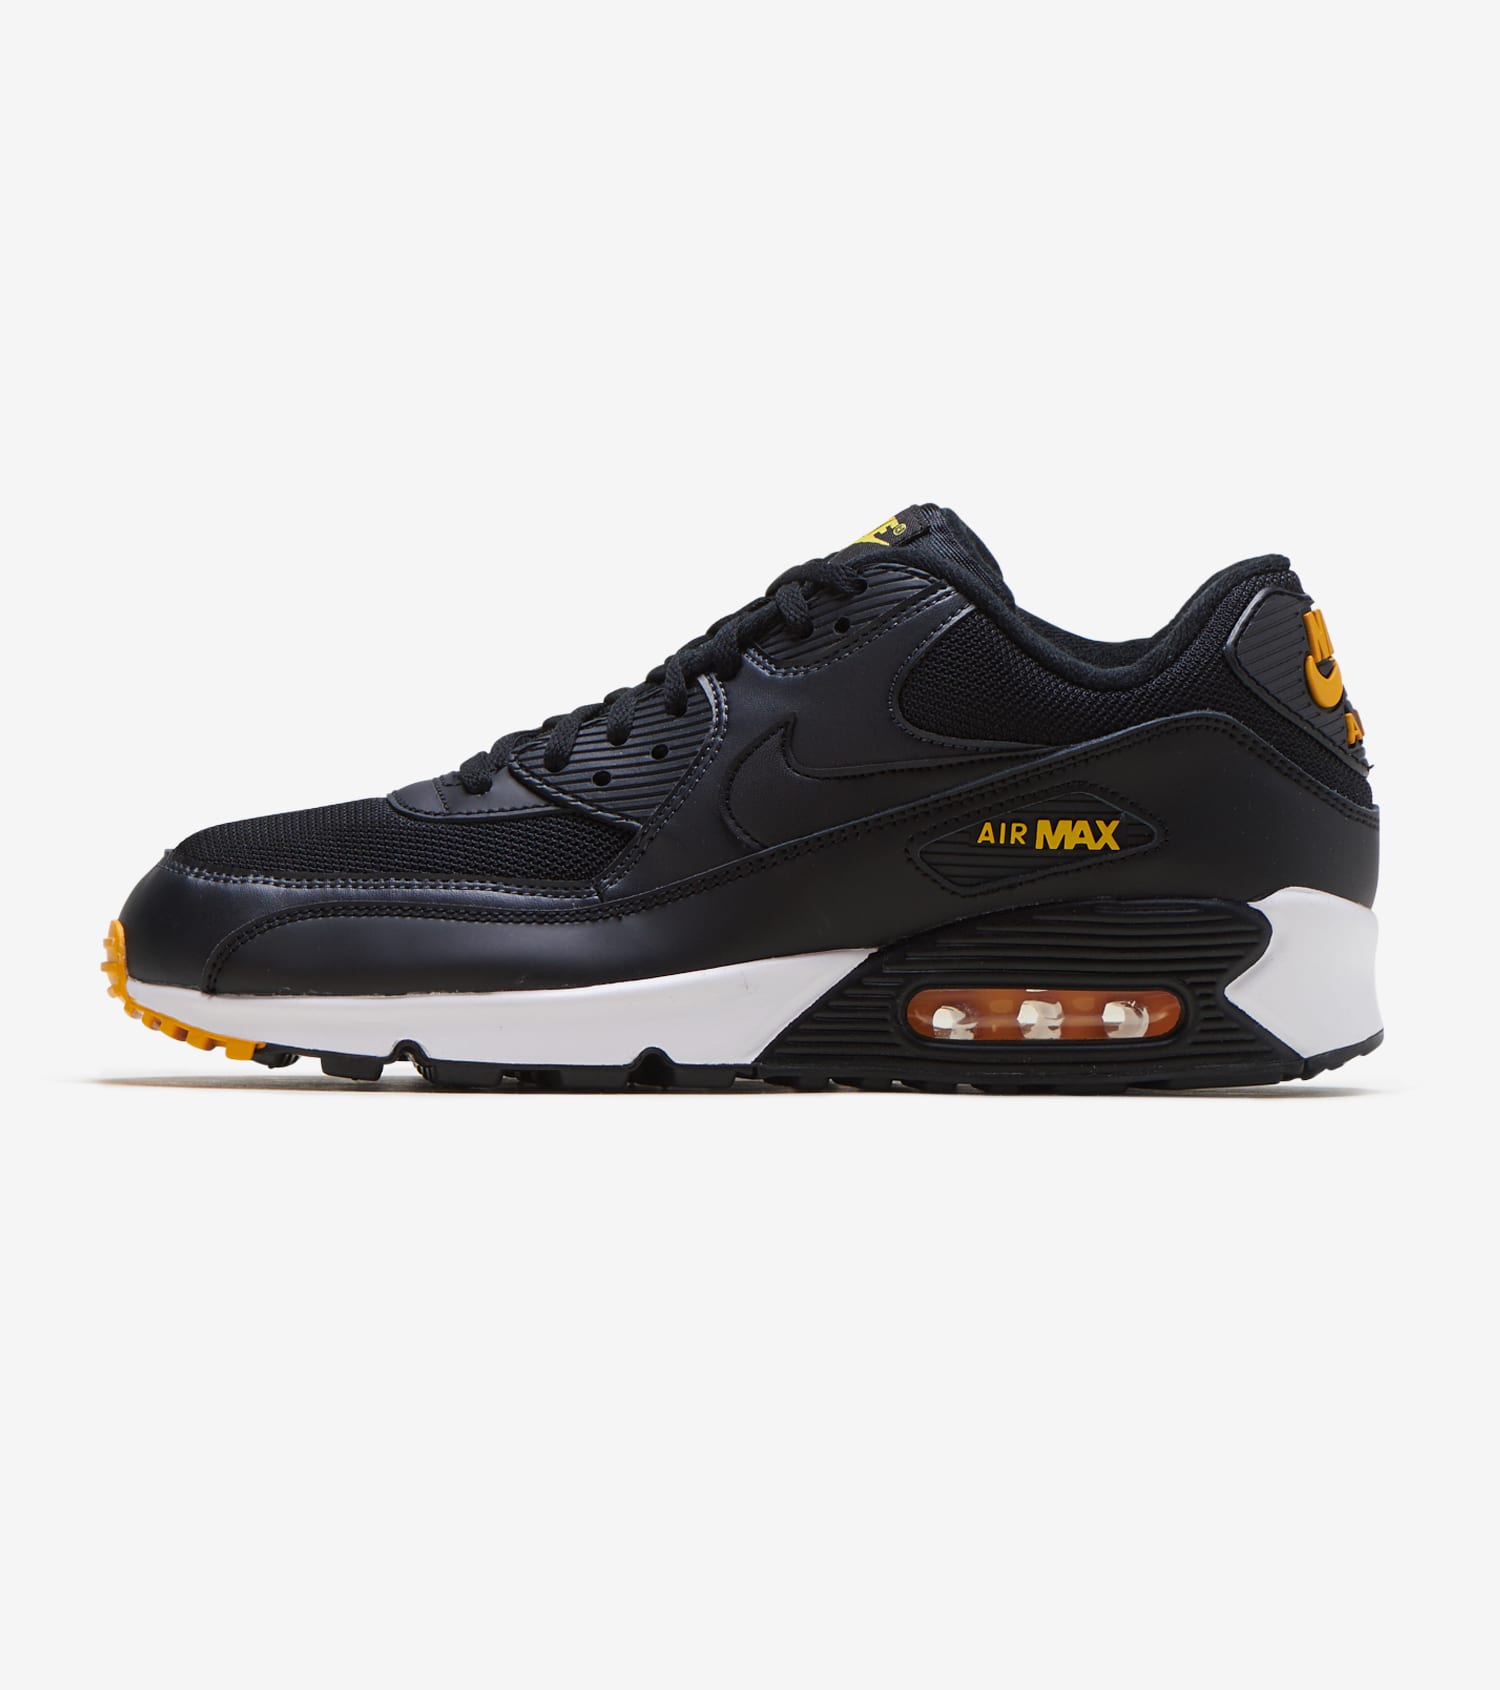 Nike Air Max 90 Essential All Black (537384 090) just do it